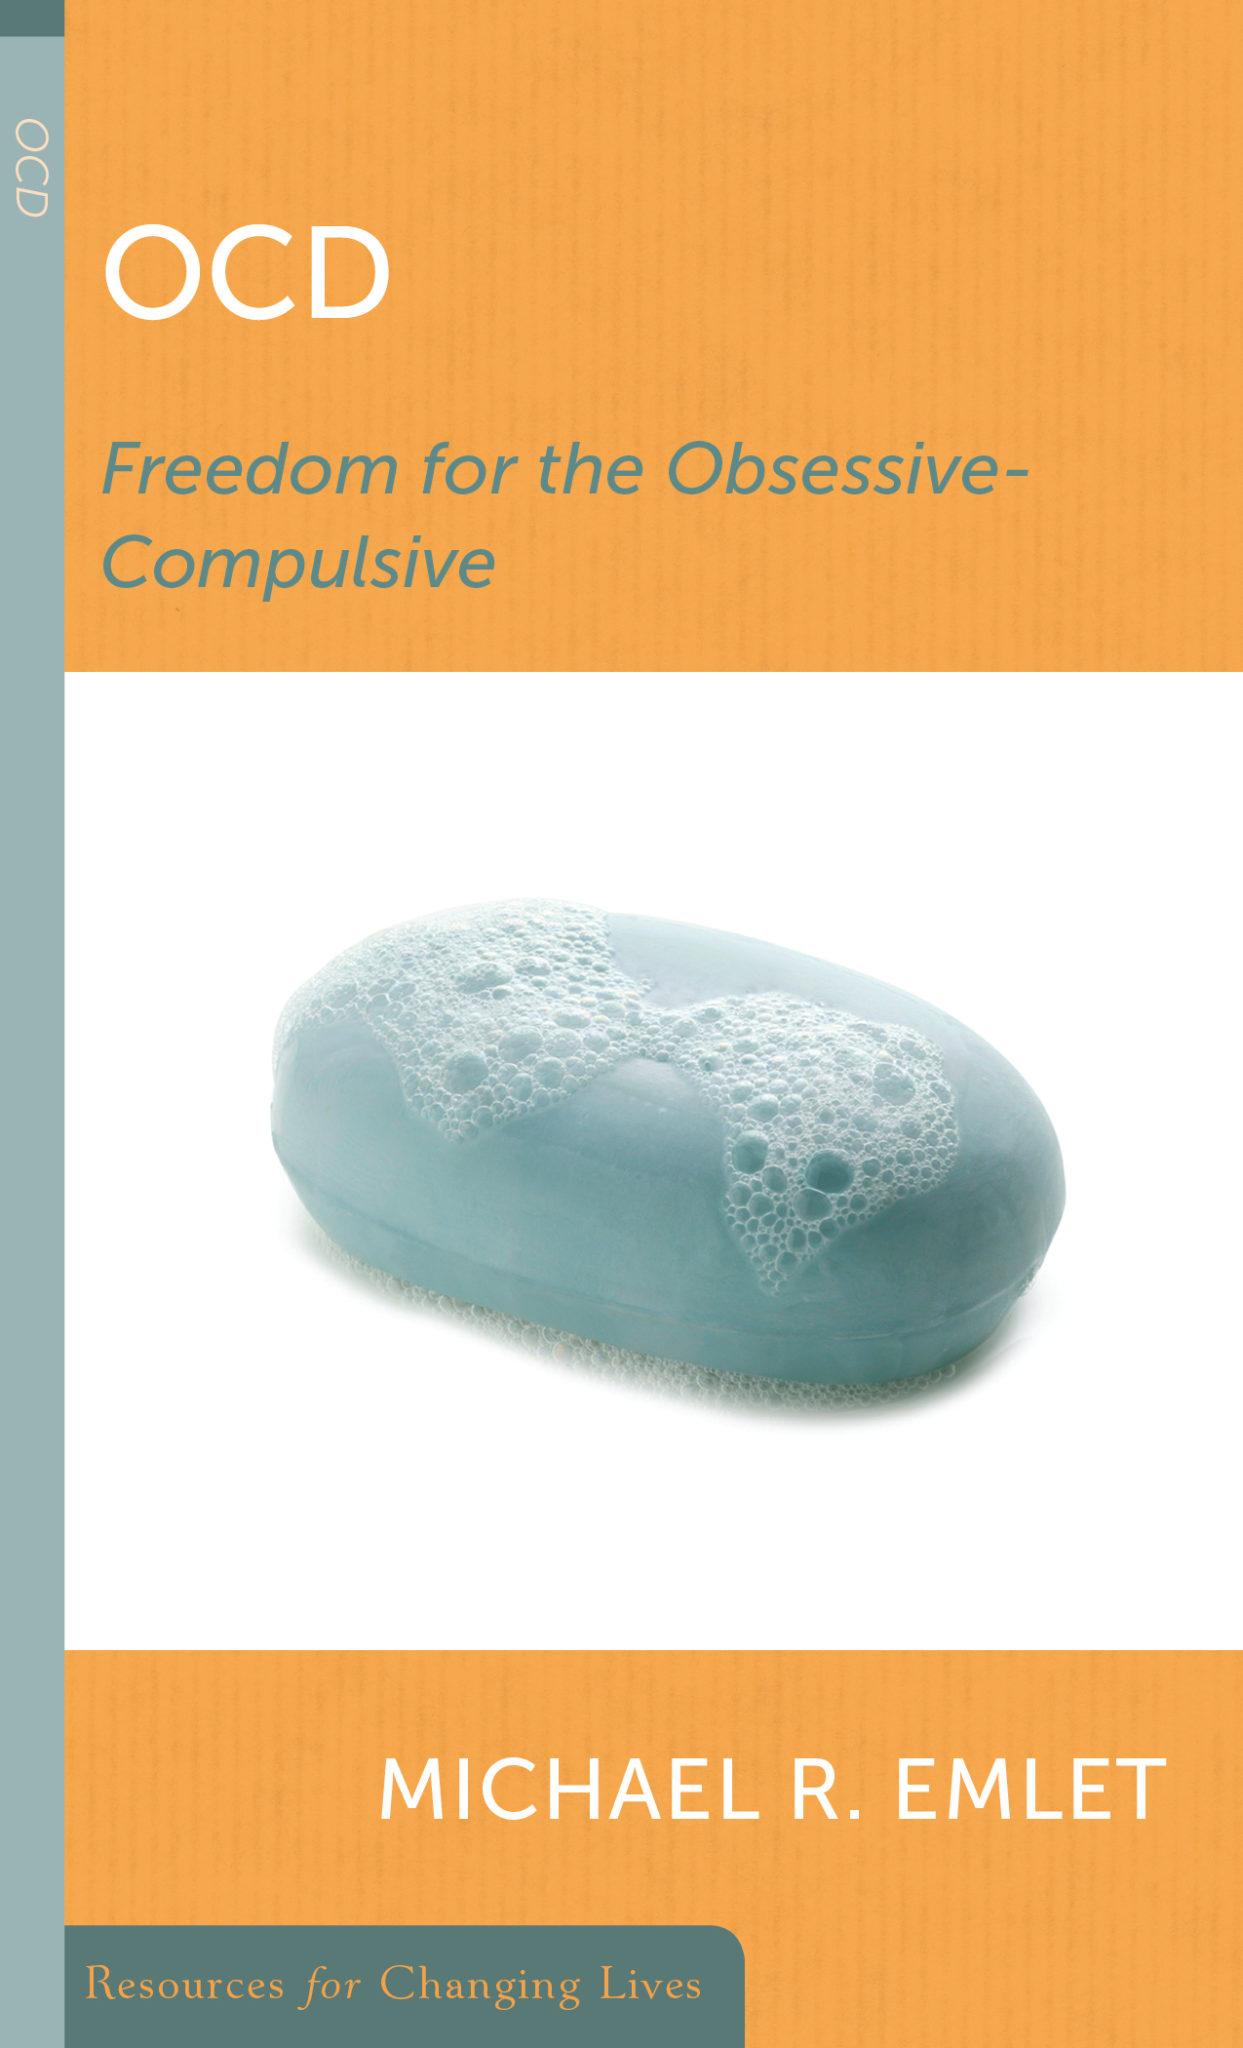 OCD: Freedom for the Obsessive Compulsive Featured Image